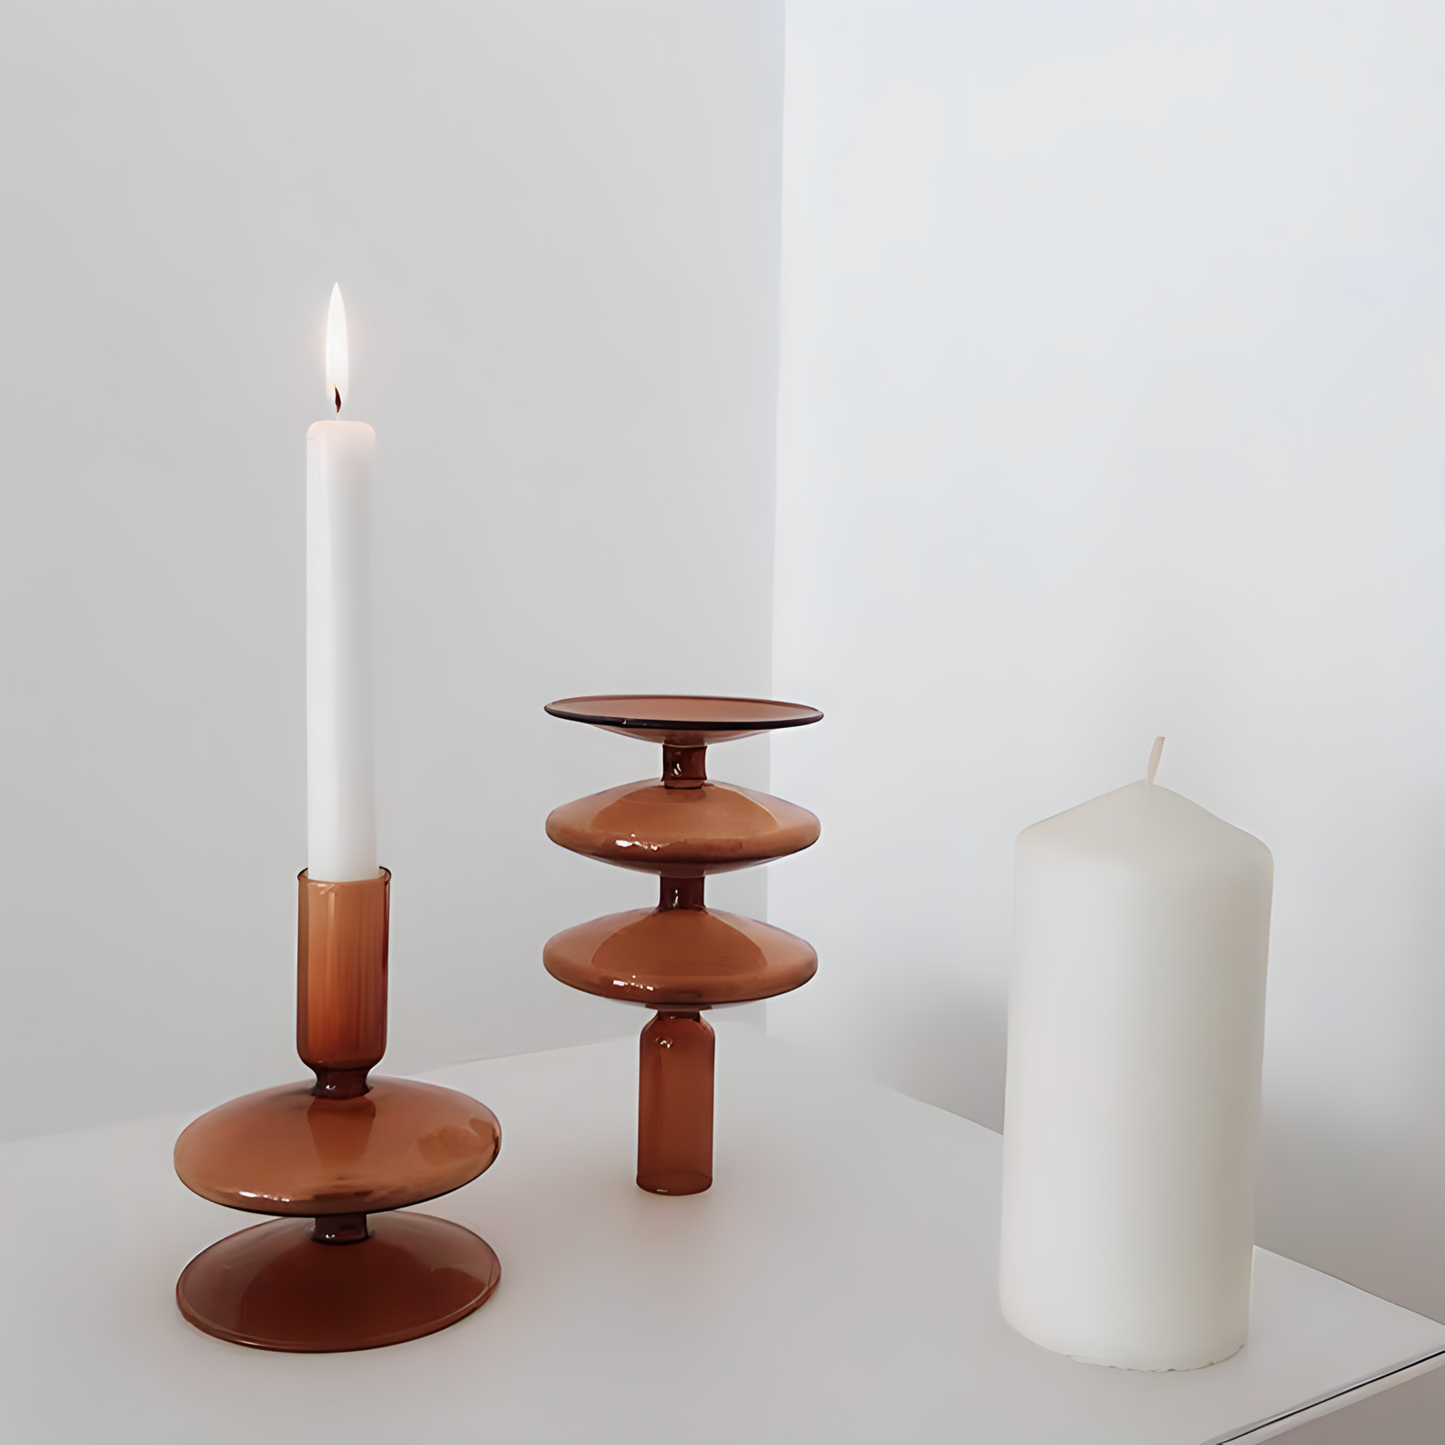 RETRO DREAM GLASS CANDLE HOLDER COLLECTION